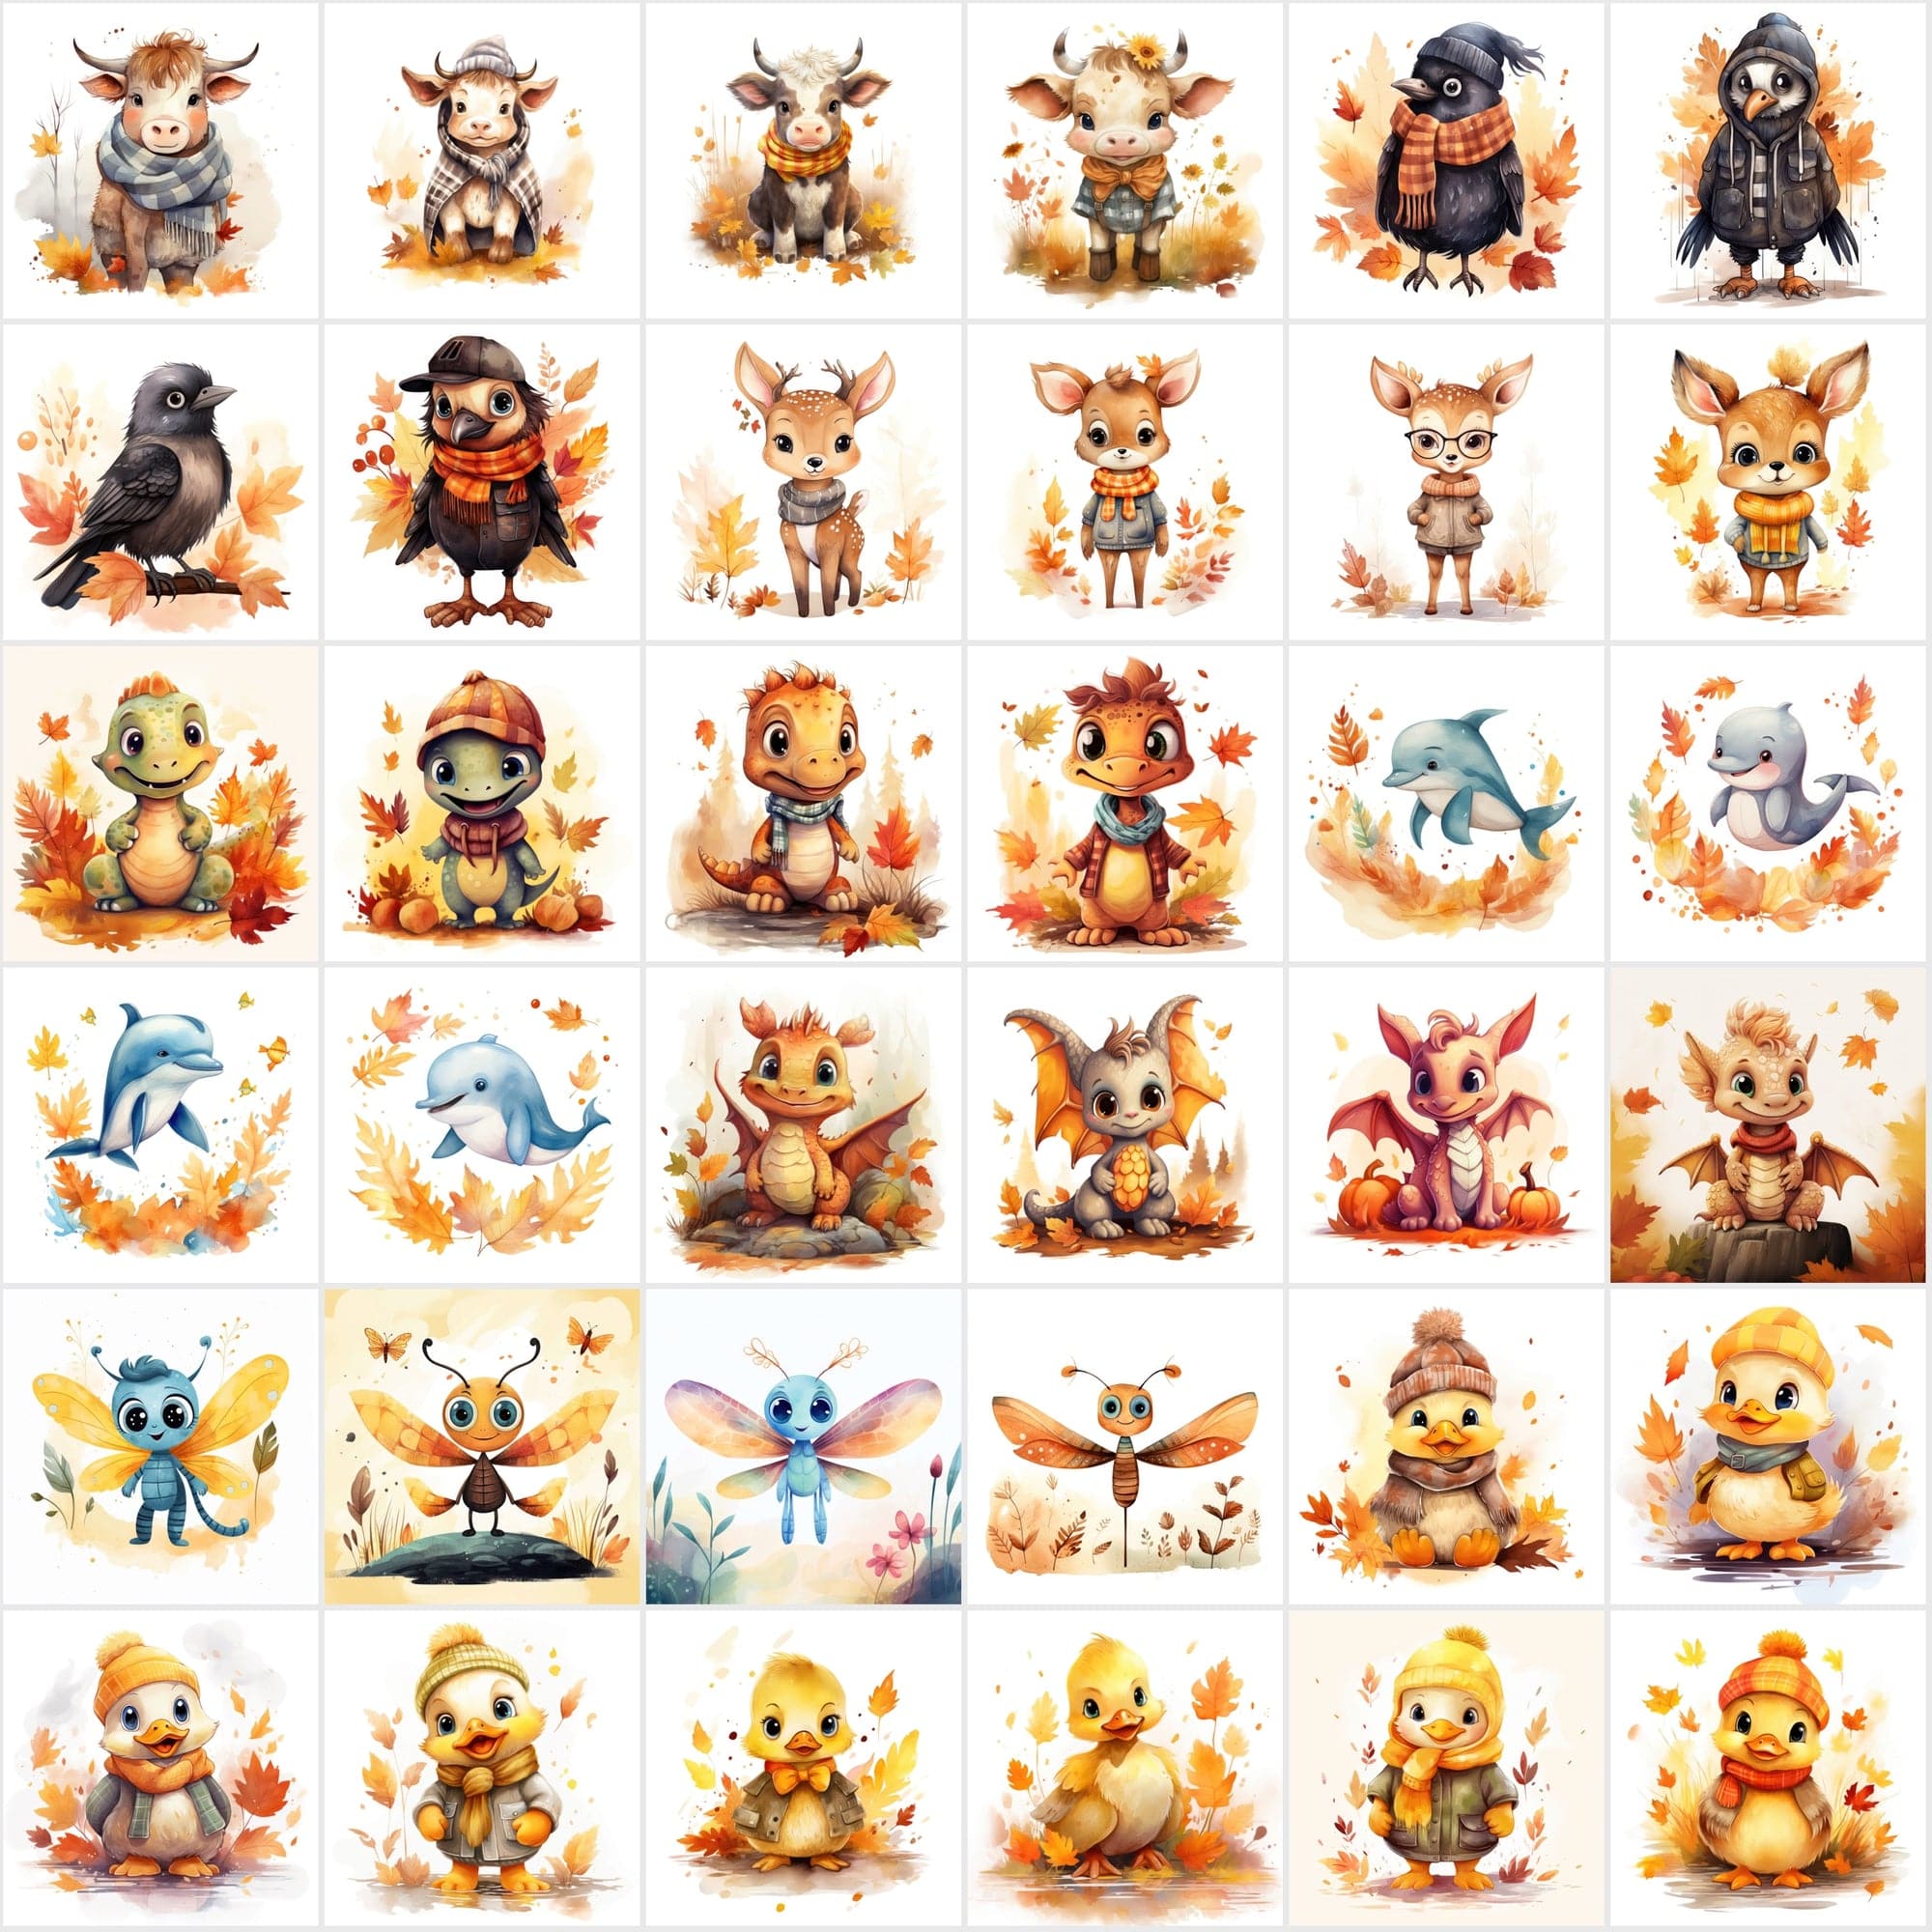 Fall in Love with Autumn: 290 High-Res Animal Illustrations Digital Download Sumobundle